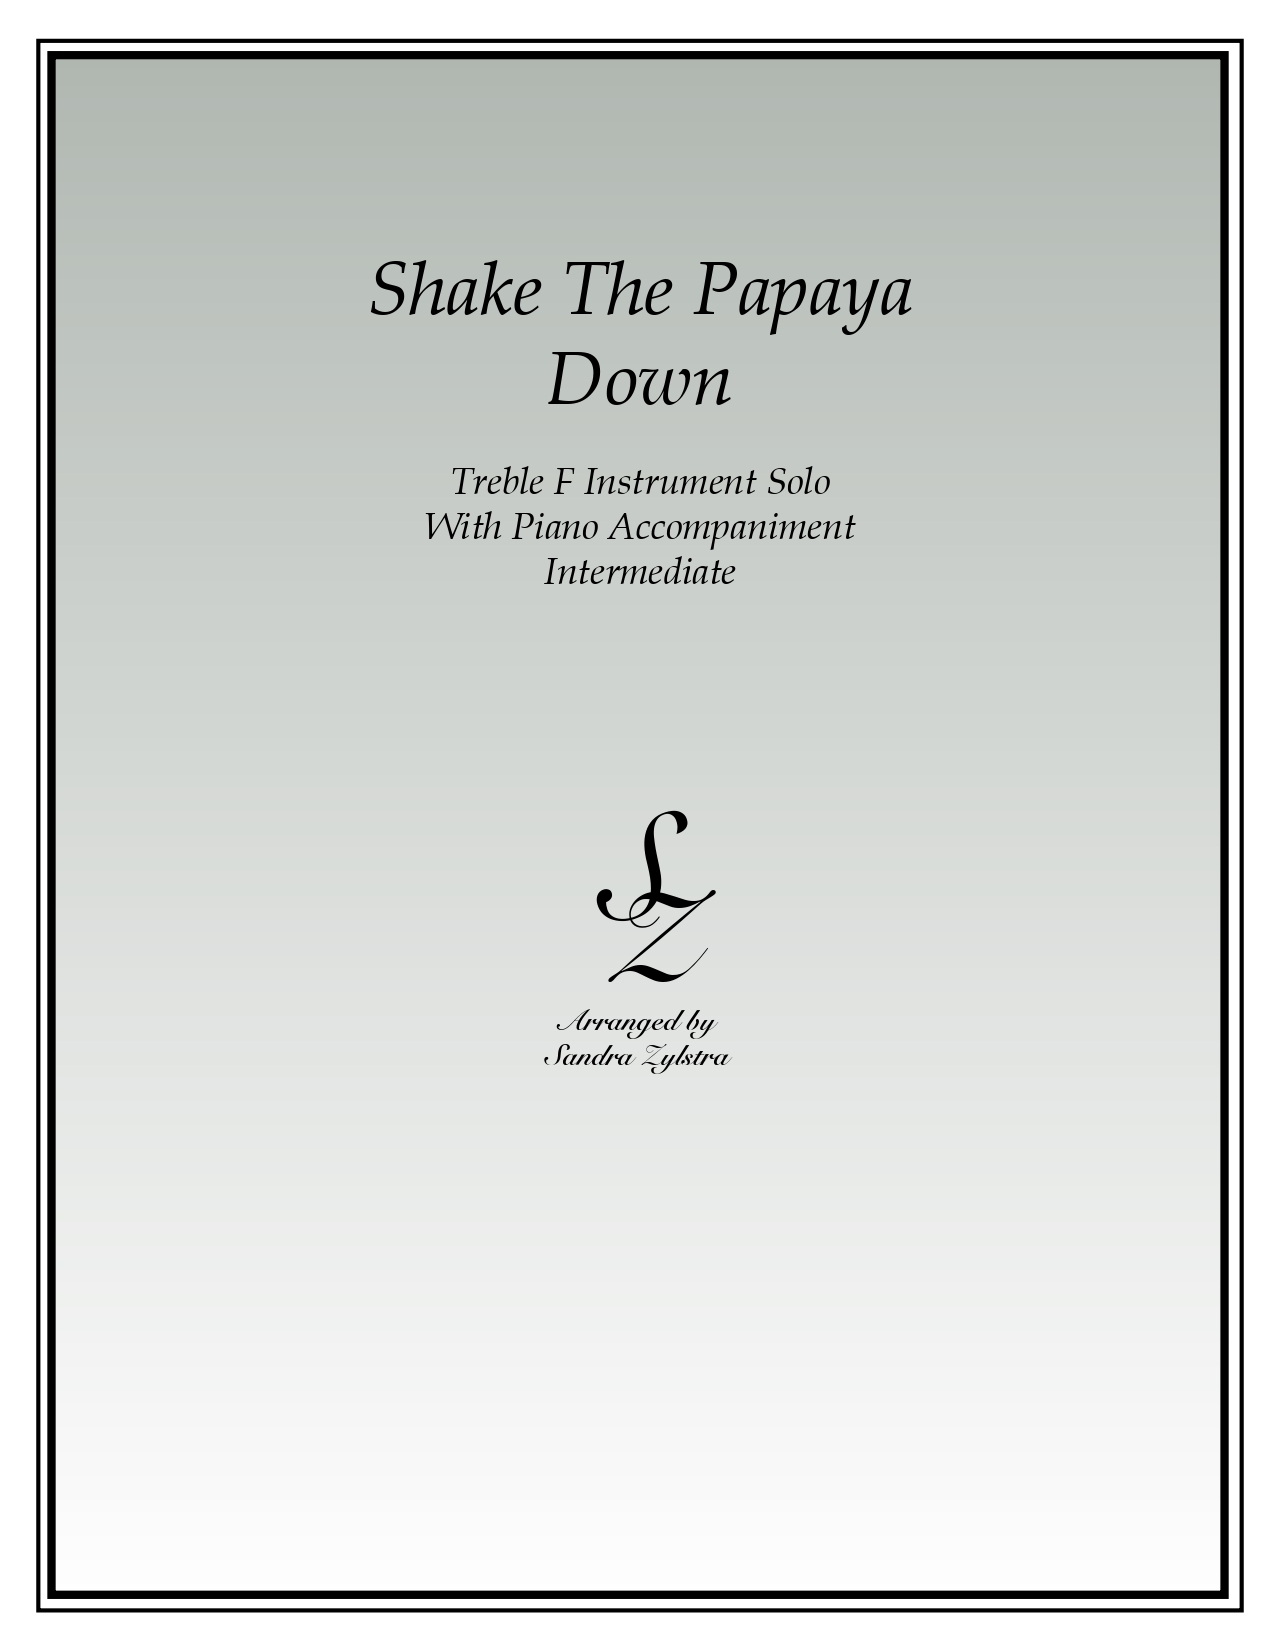 Shake The Papaya Down F instrument solo part cover page 00011